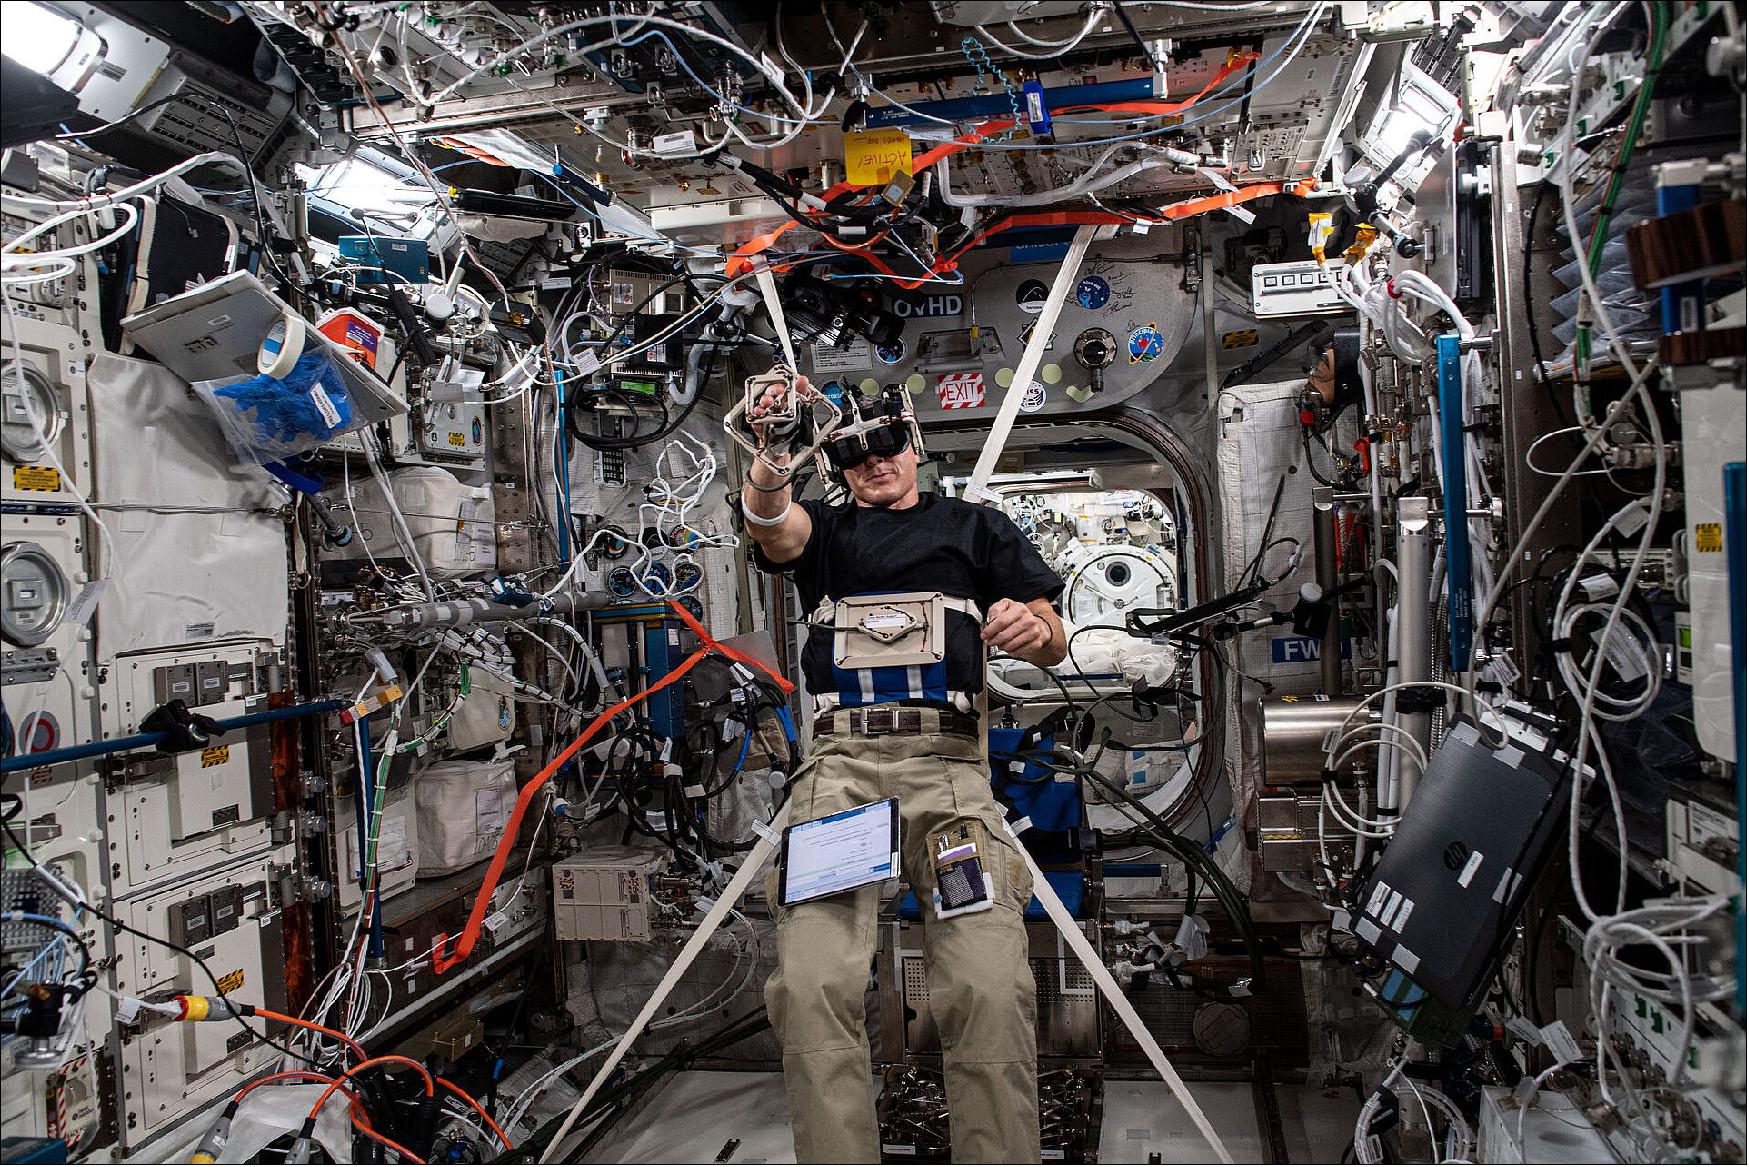 Figure 143: NASA astronaut Mike Hopkins performs the Grasp experiment in the Columbus module of the ISS ahead of the New Year (image credit: ESA/NASA)